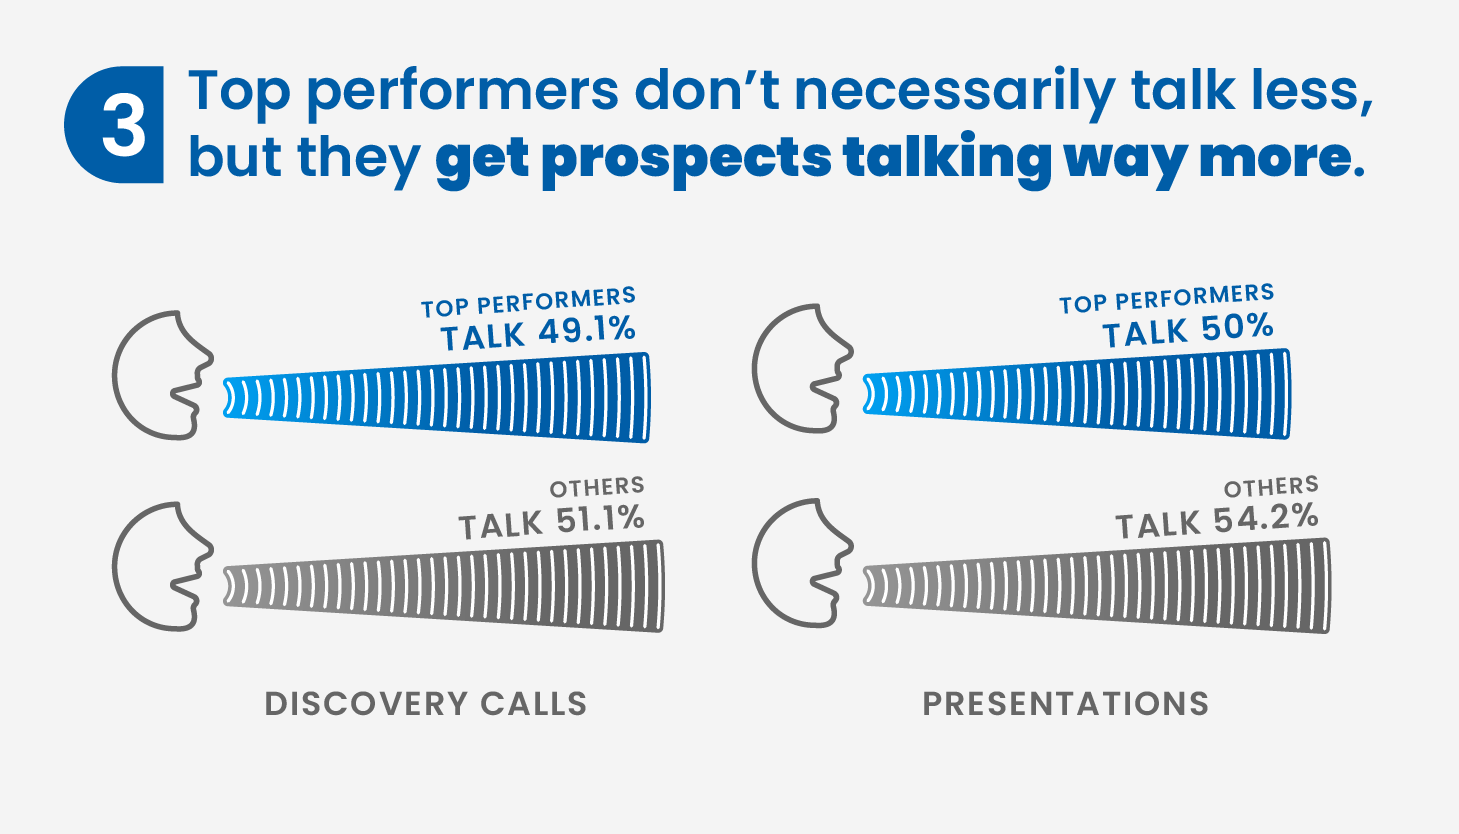 3. Top performers don't necessarily talk less, but they get prospects talking way more